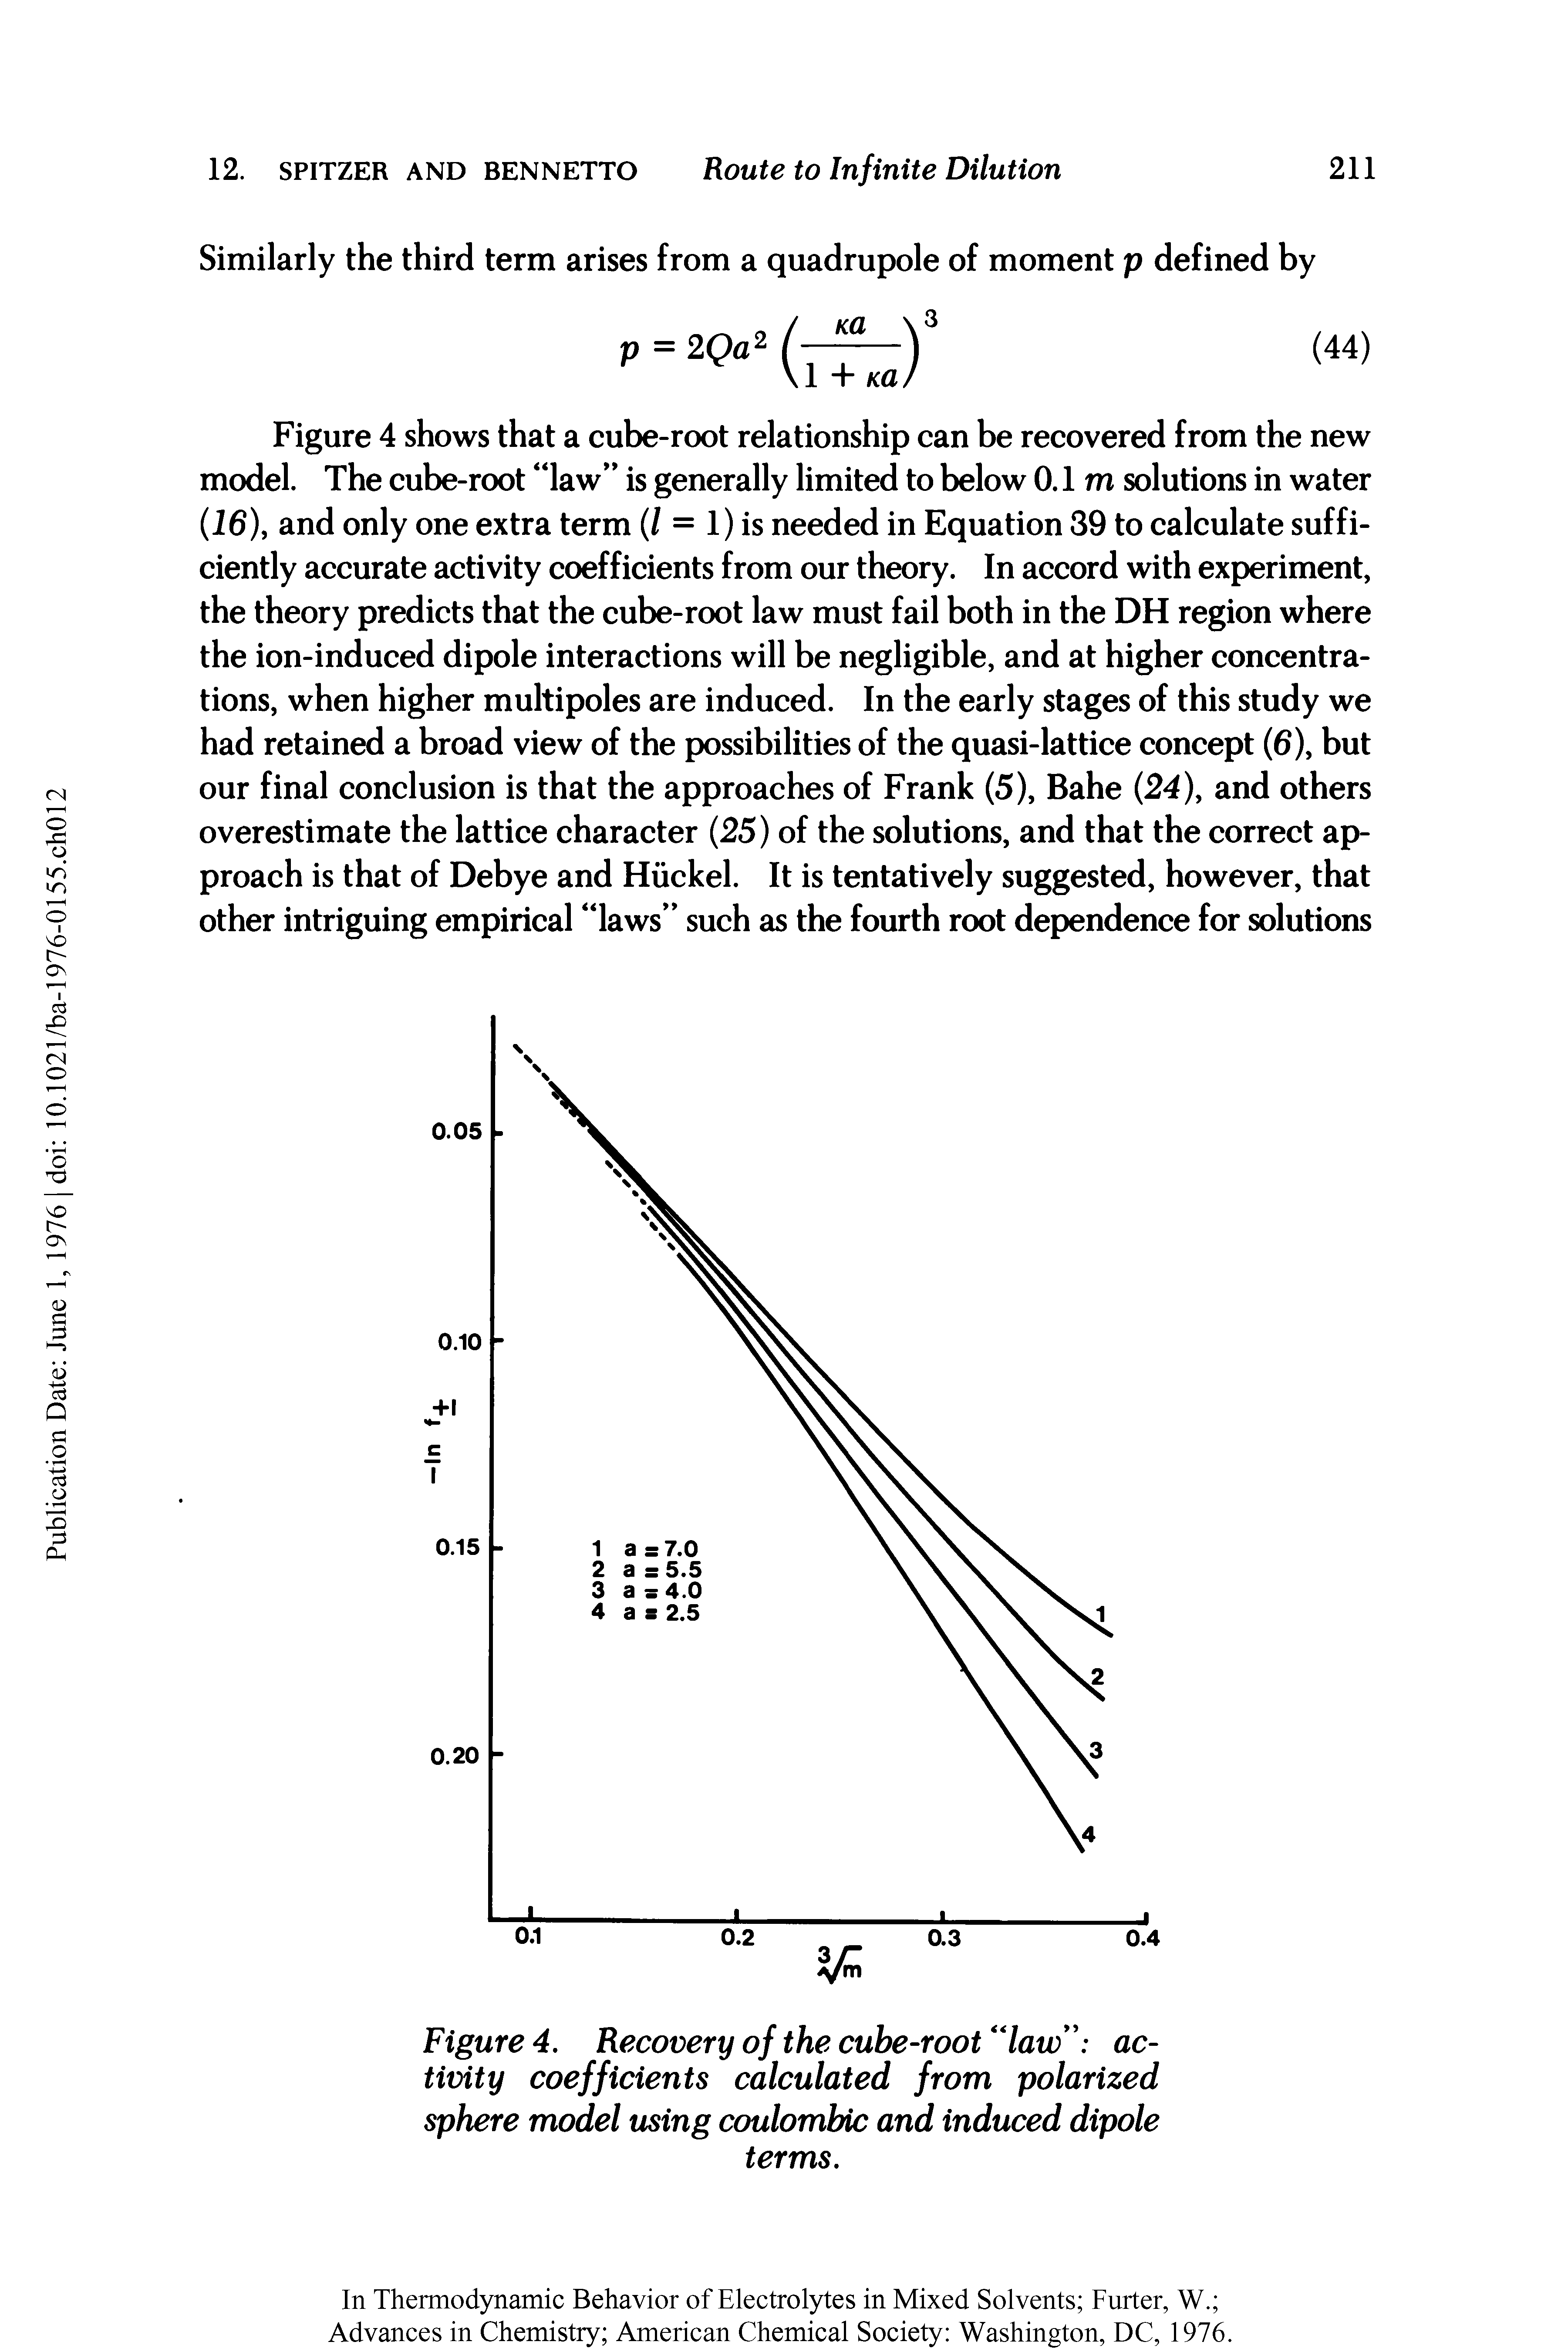 Figure 4. Recovery of the cube-root law activity coefficients calculated from polarized sphere model using coulombic and induced dipole terms.